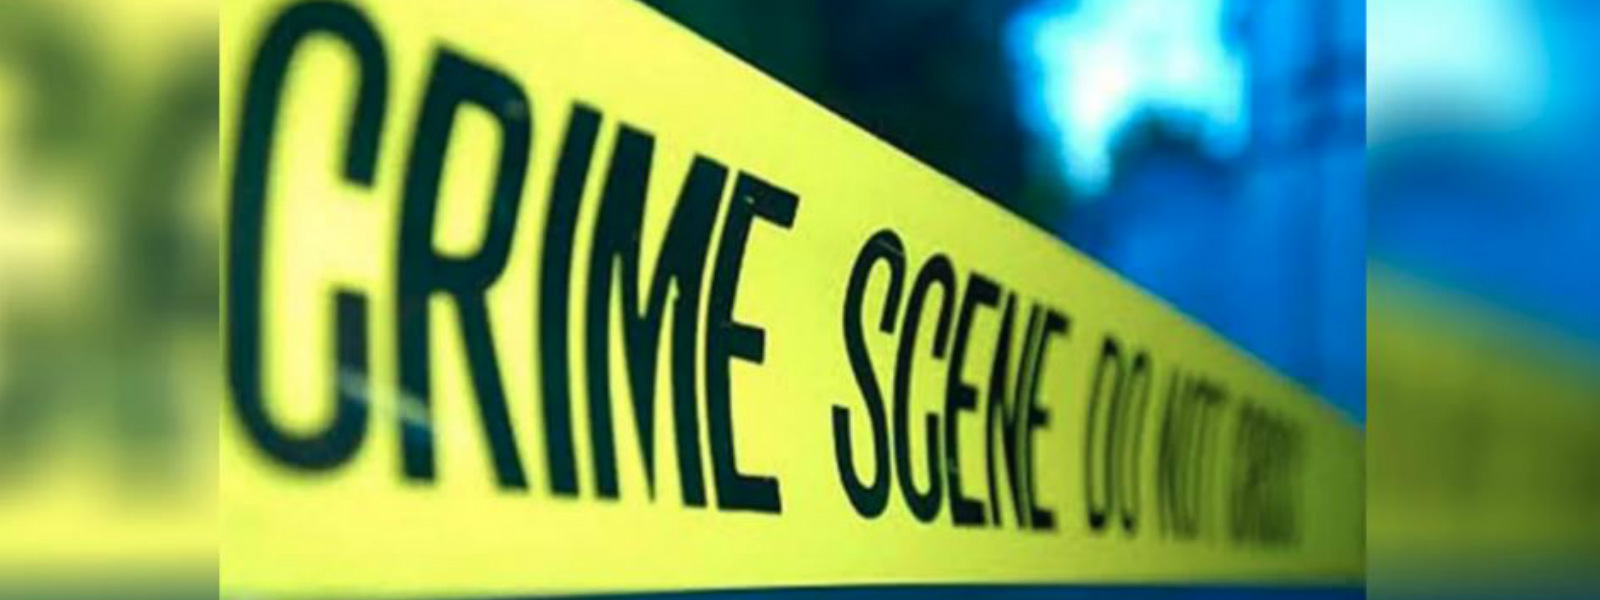 Individual stabbed to death in Beruwela